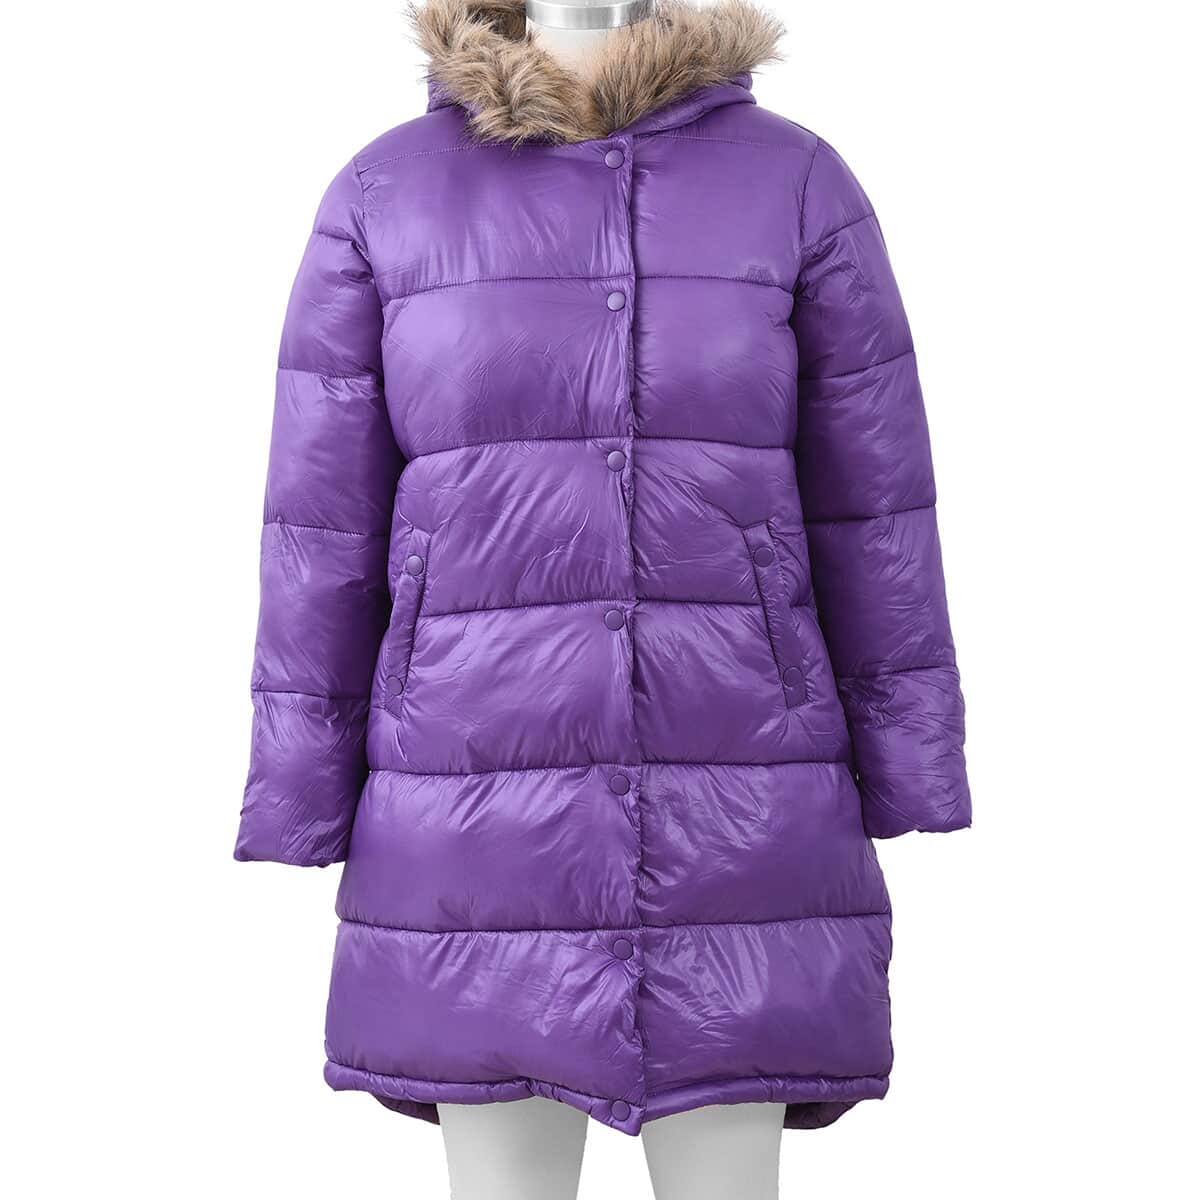 Purple Women's Puffer Jacket with Faux Fur Hood and Pockets - L (Nylon/Polyester) image number 0